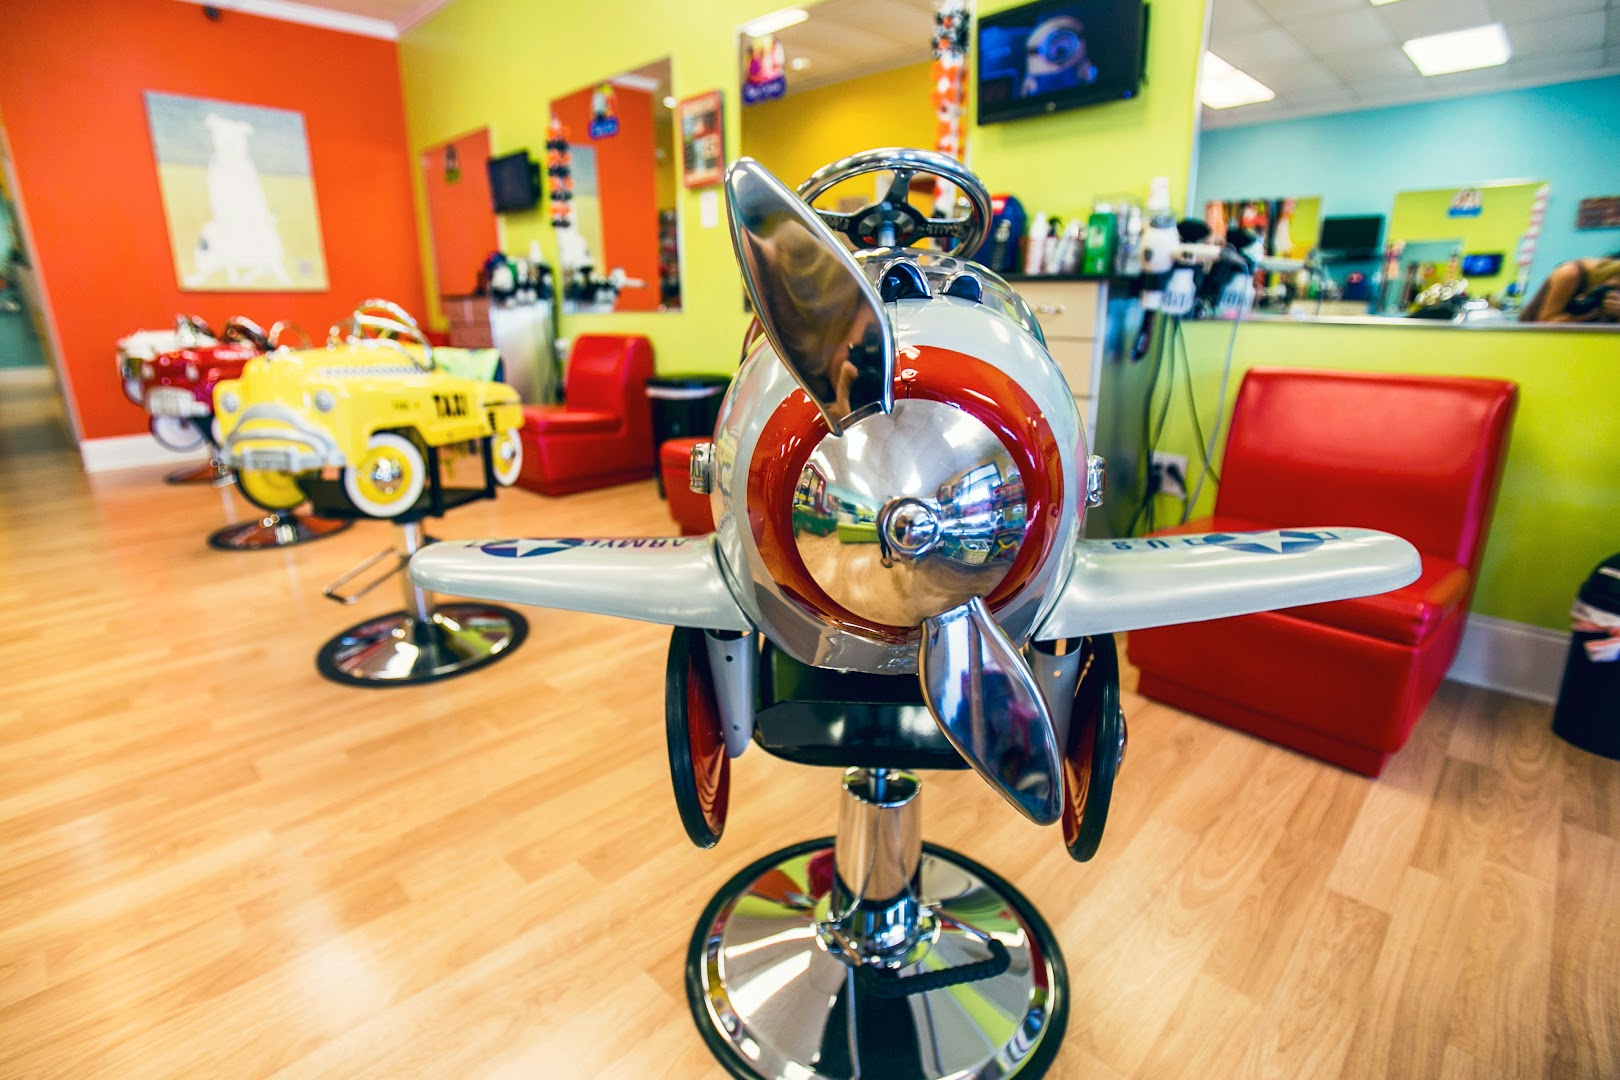 Pigtails & Crewcuts: Haircuts for Kids - Annapolis, MD